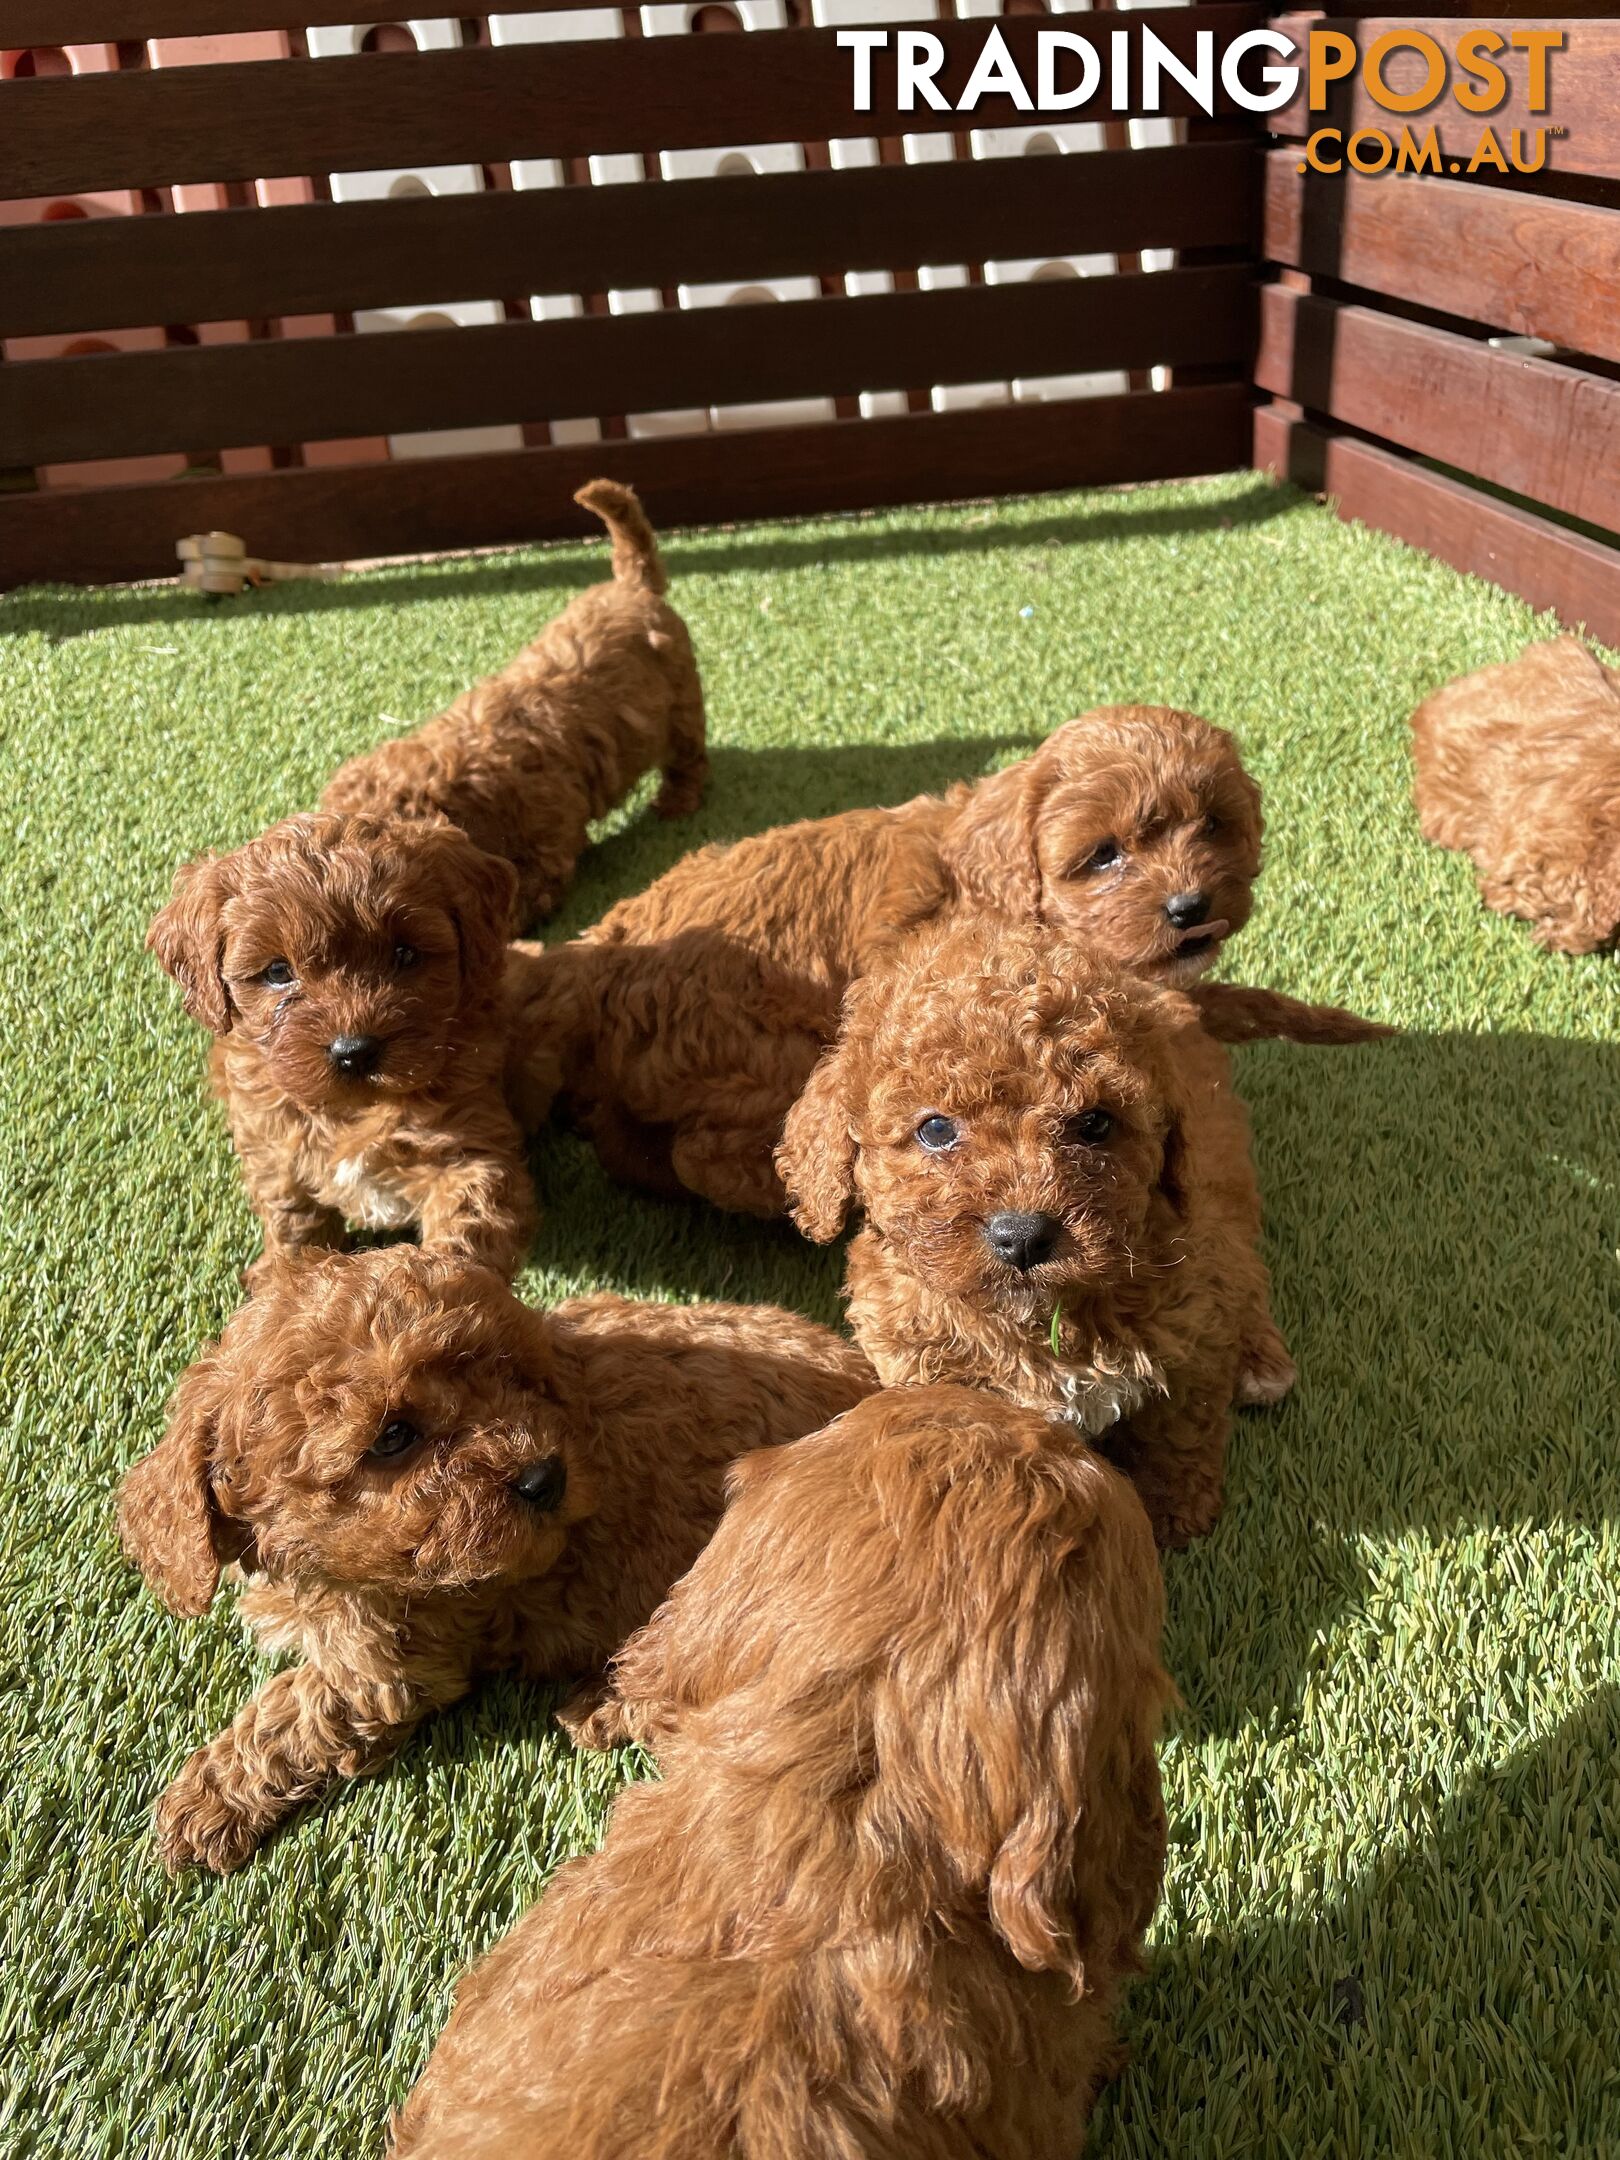 Toy Cavoodle puppies looking for their forever home